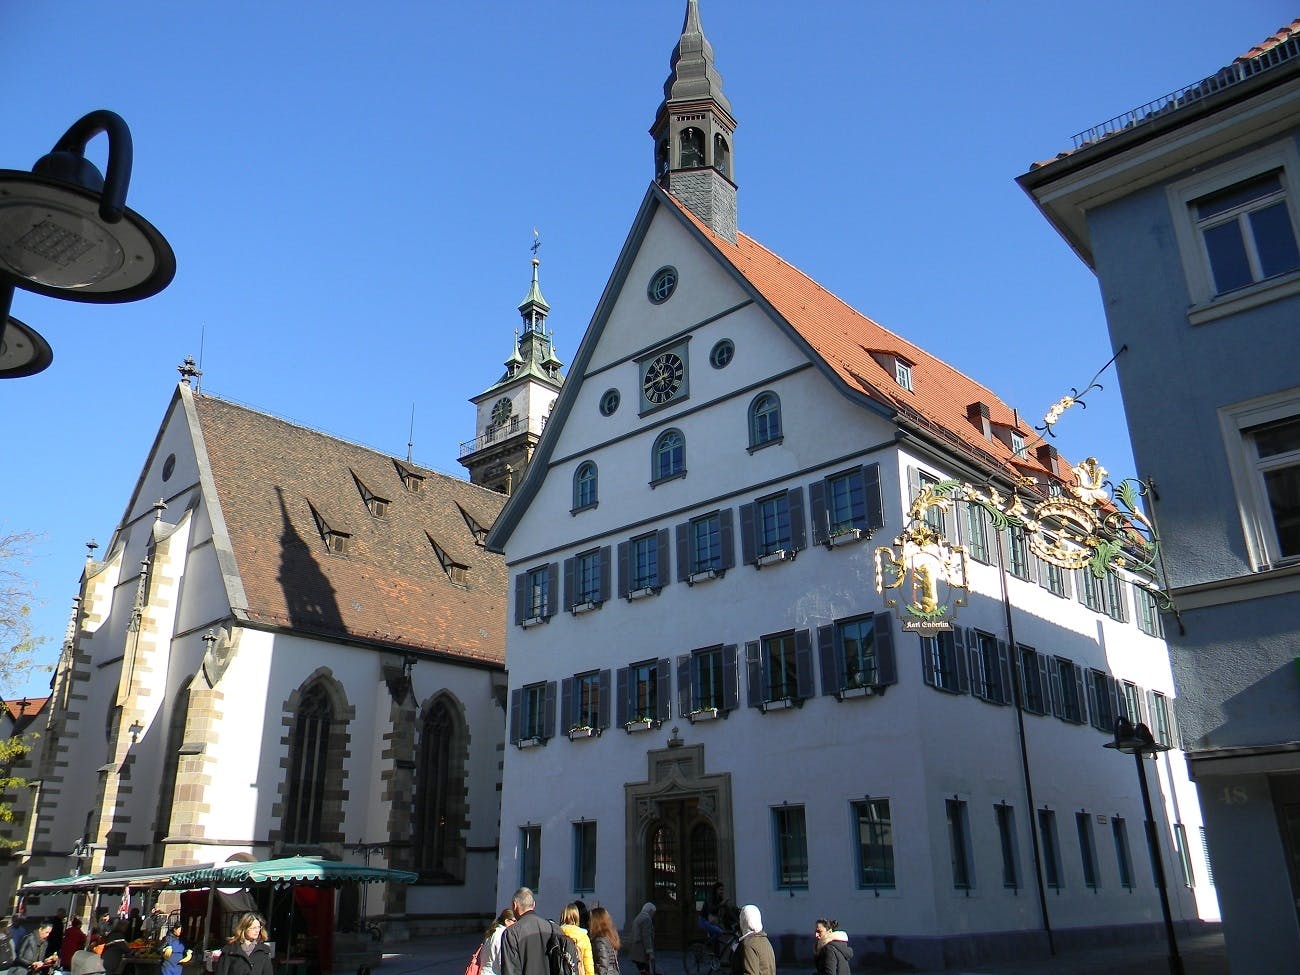 Old town walking tour in Bad Cannstatt for private groups Musement